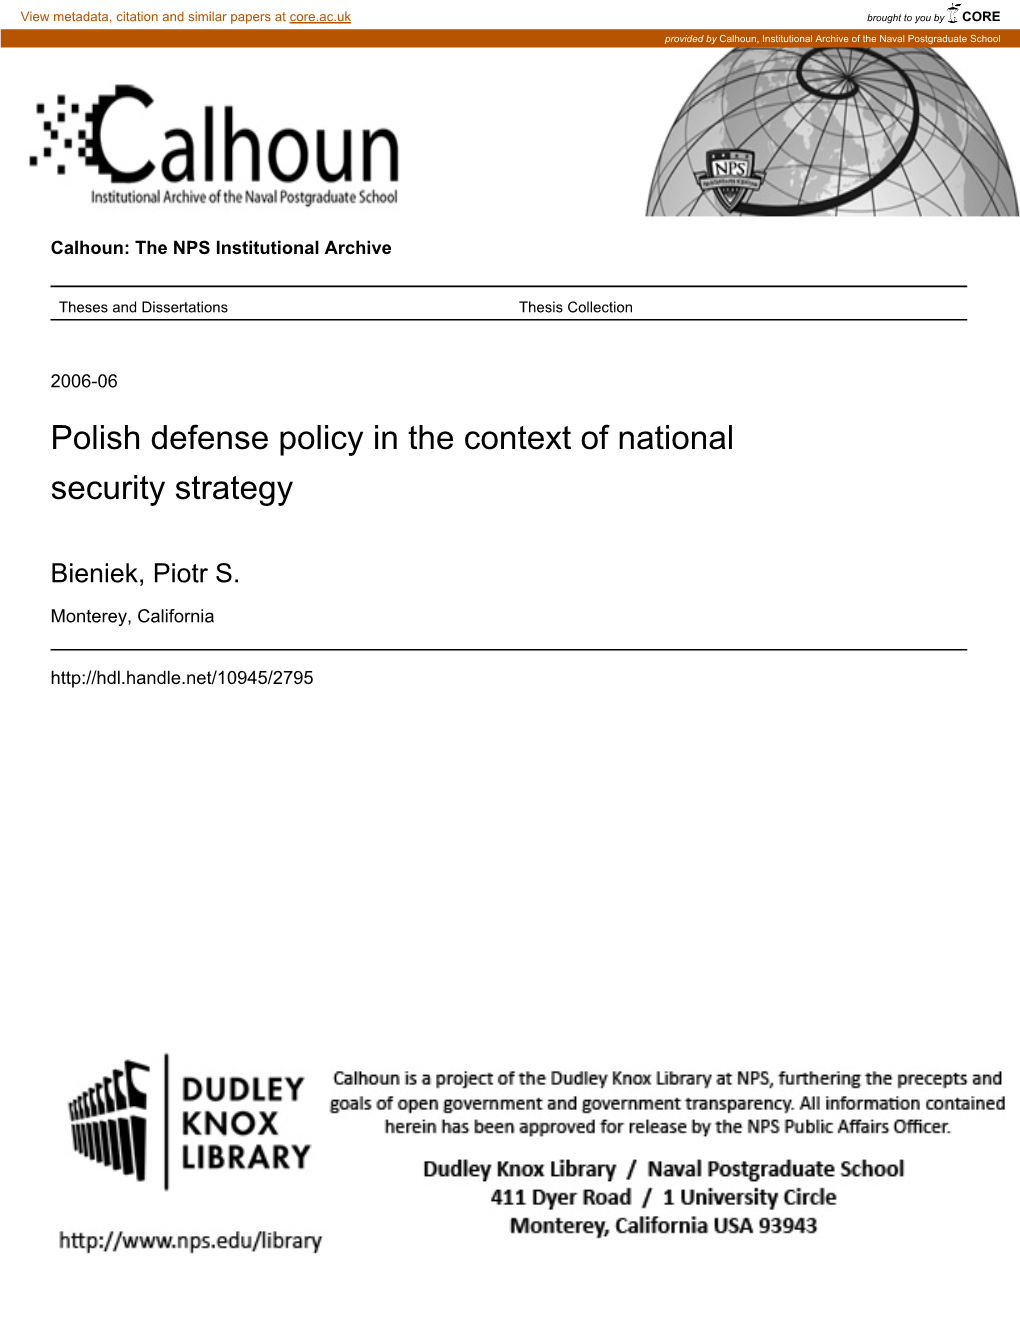 Polish Defense Policy in the Context of National Security Strategy